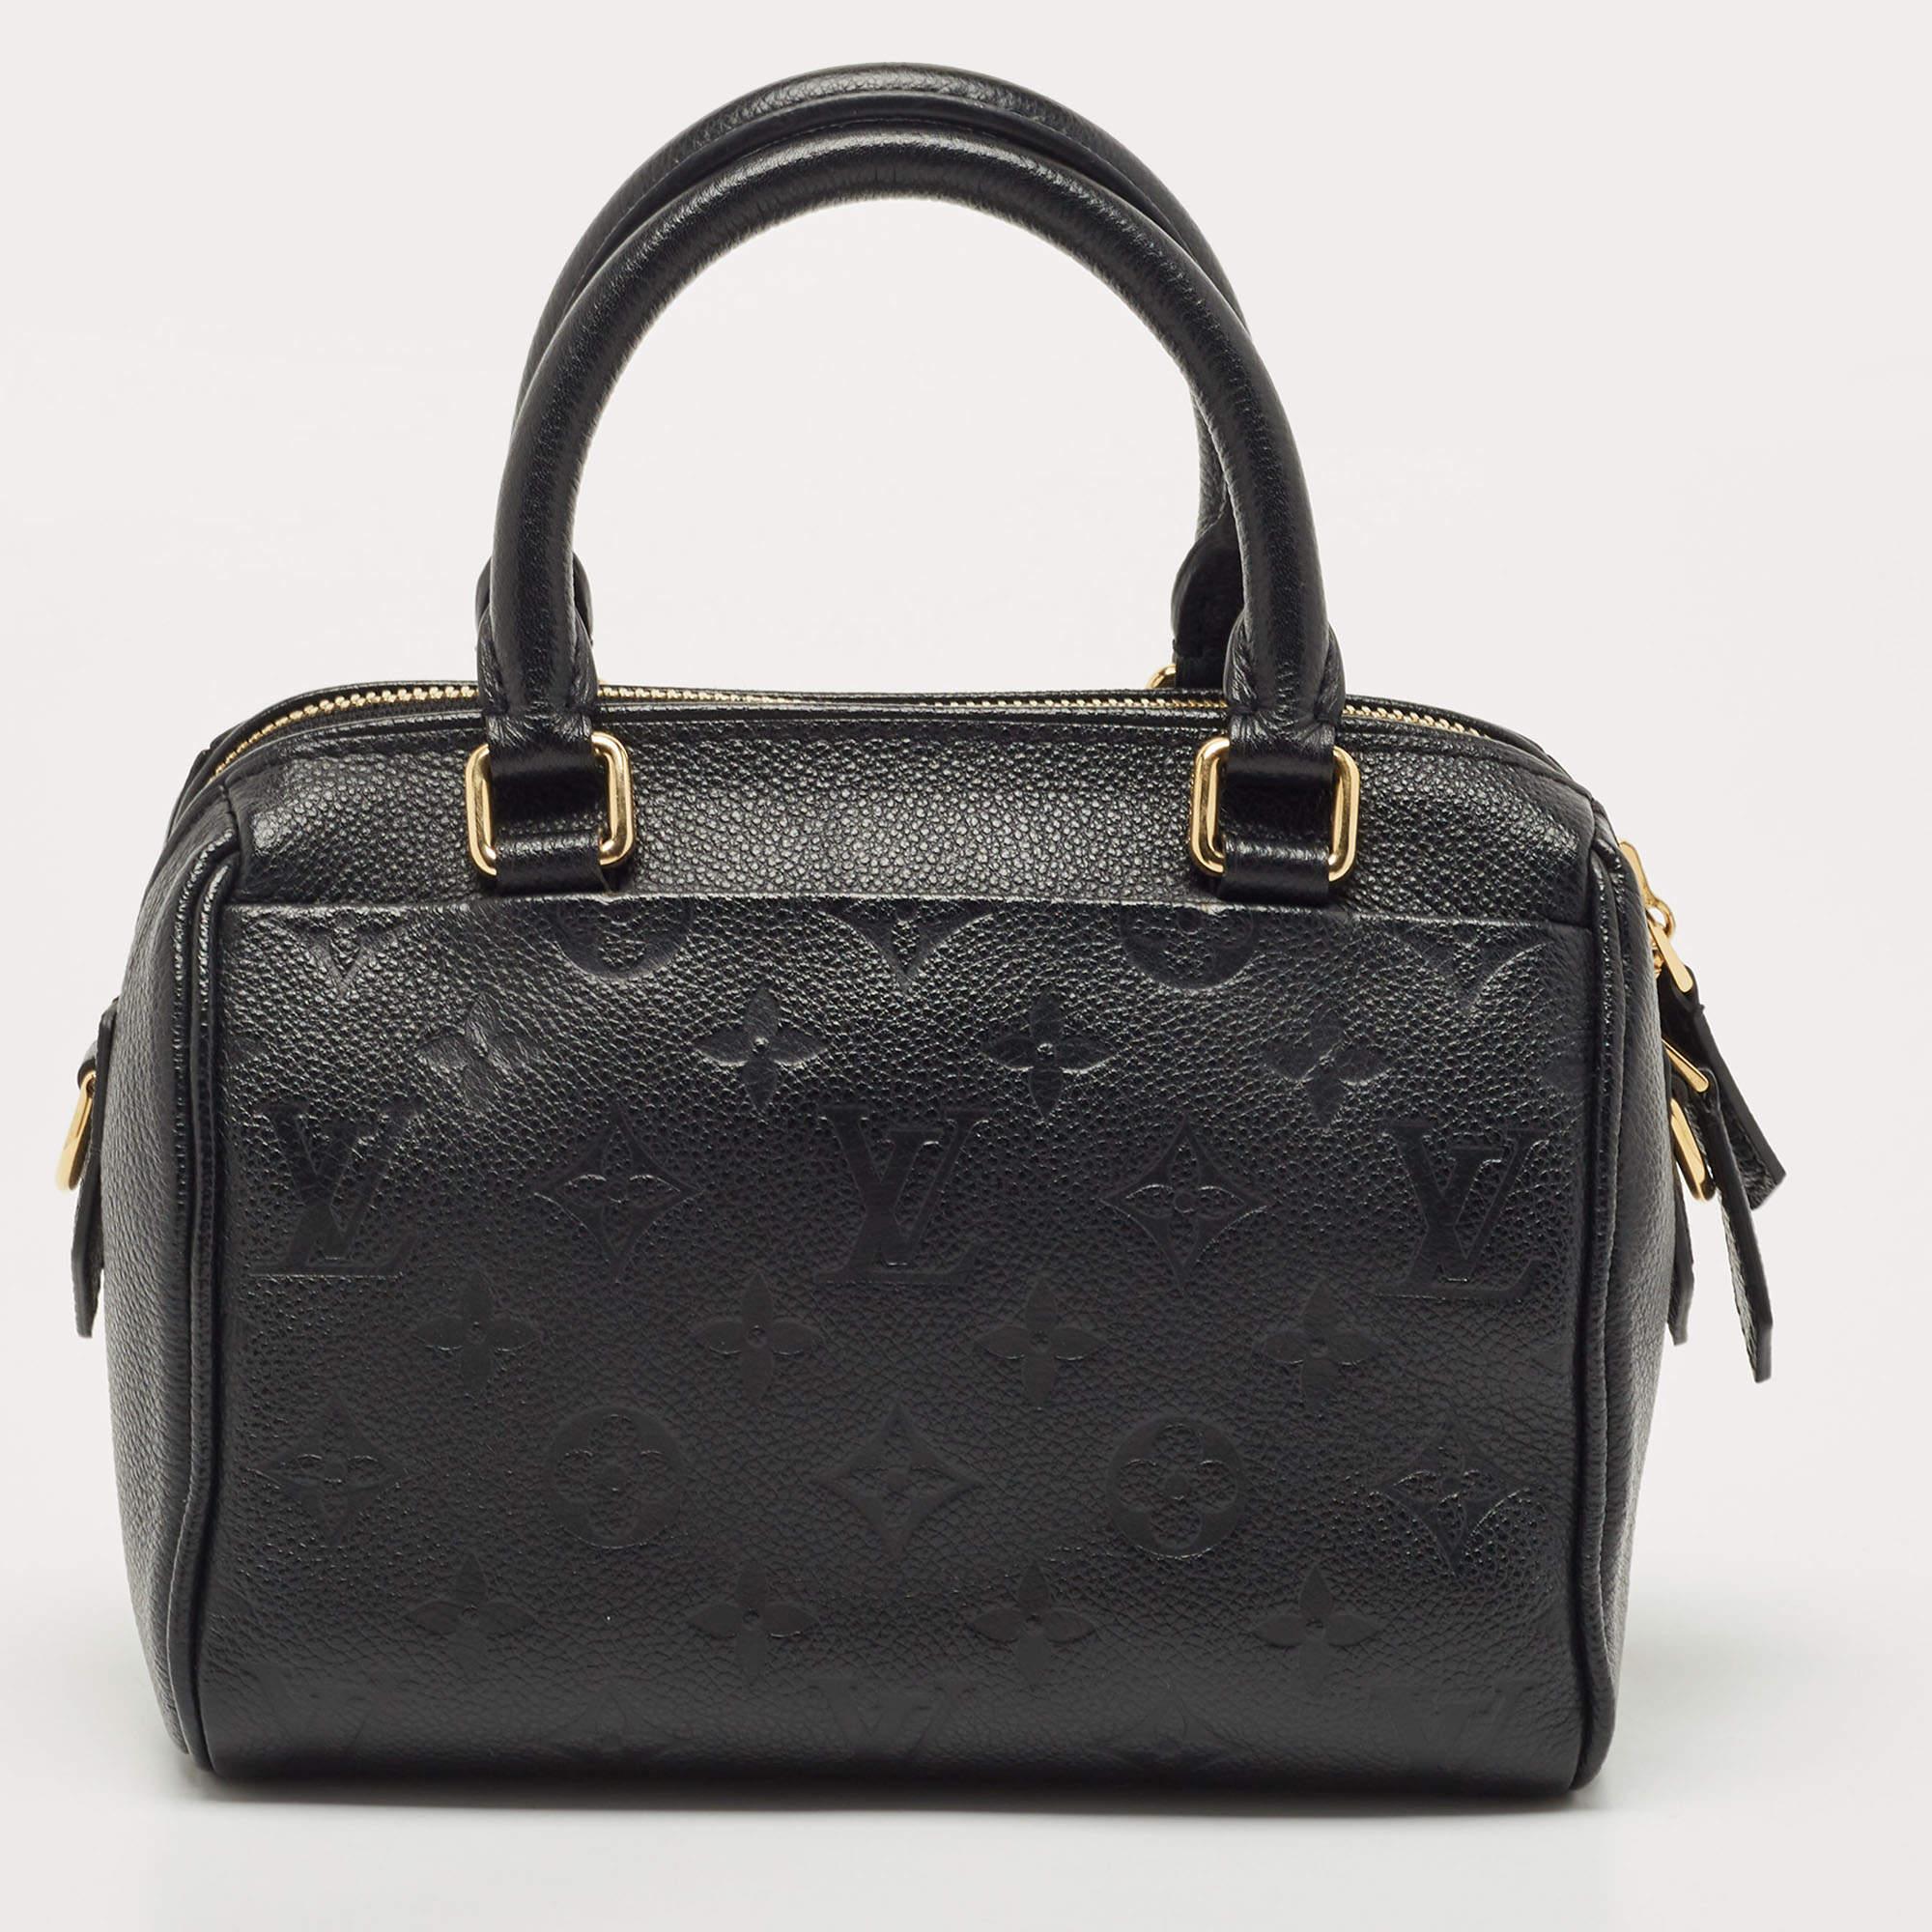 The fashion house’s tradition of excellence, coupled with modern design sensibilities, works to make this Louis Vuitton bag one of a kind. It's a fabulous accessory for everyday use.

Includes: detachable strap, Original Dustbag
